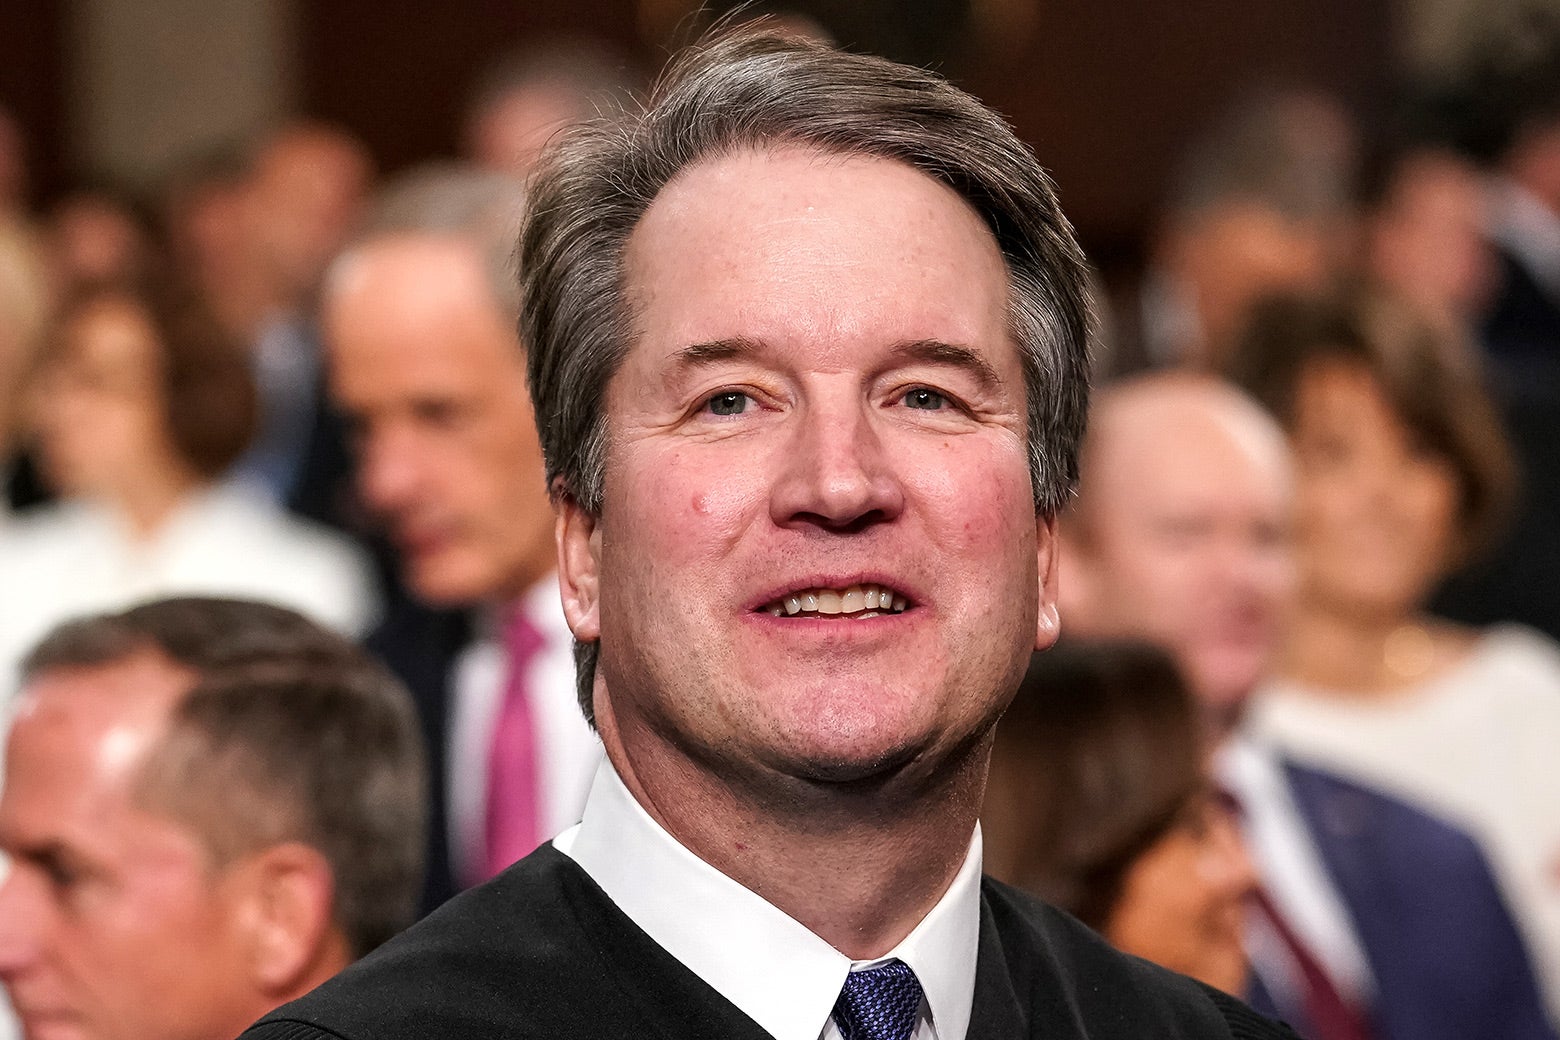 Brett Kavanaugh looking up and smiling.